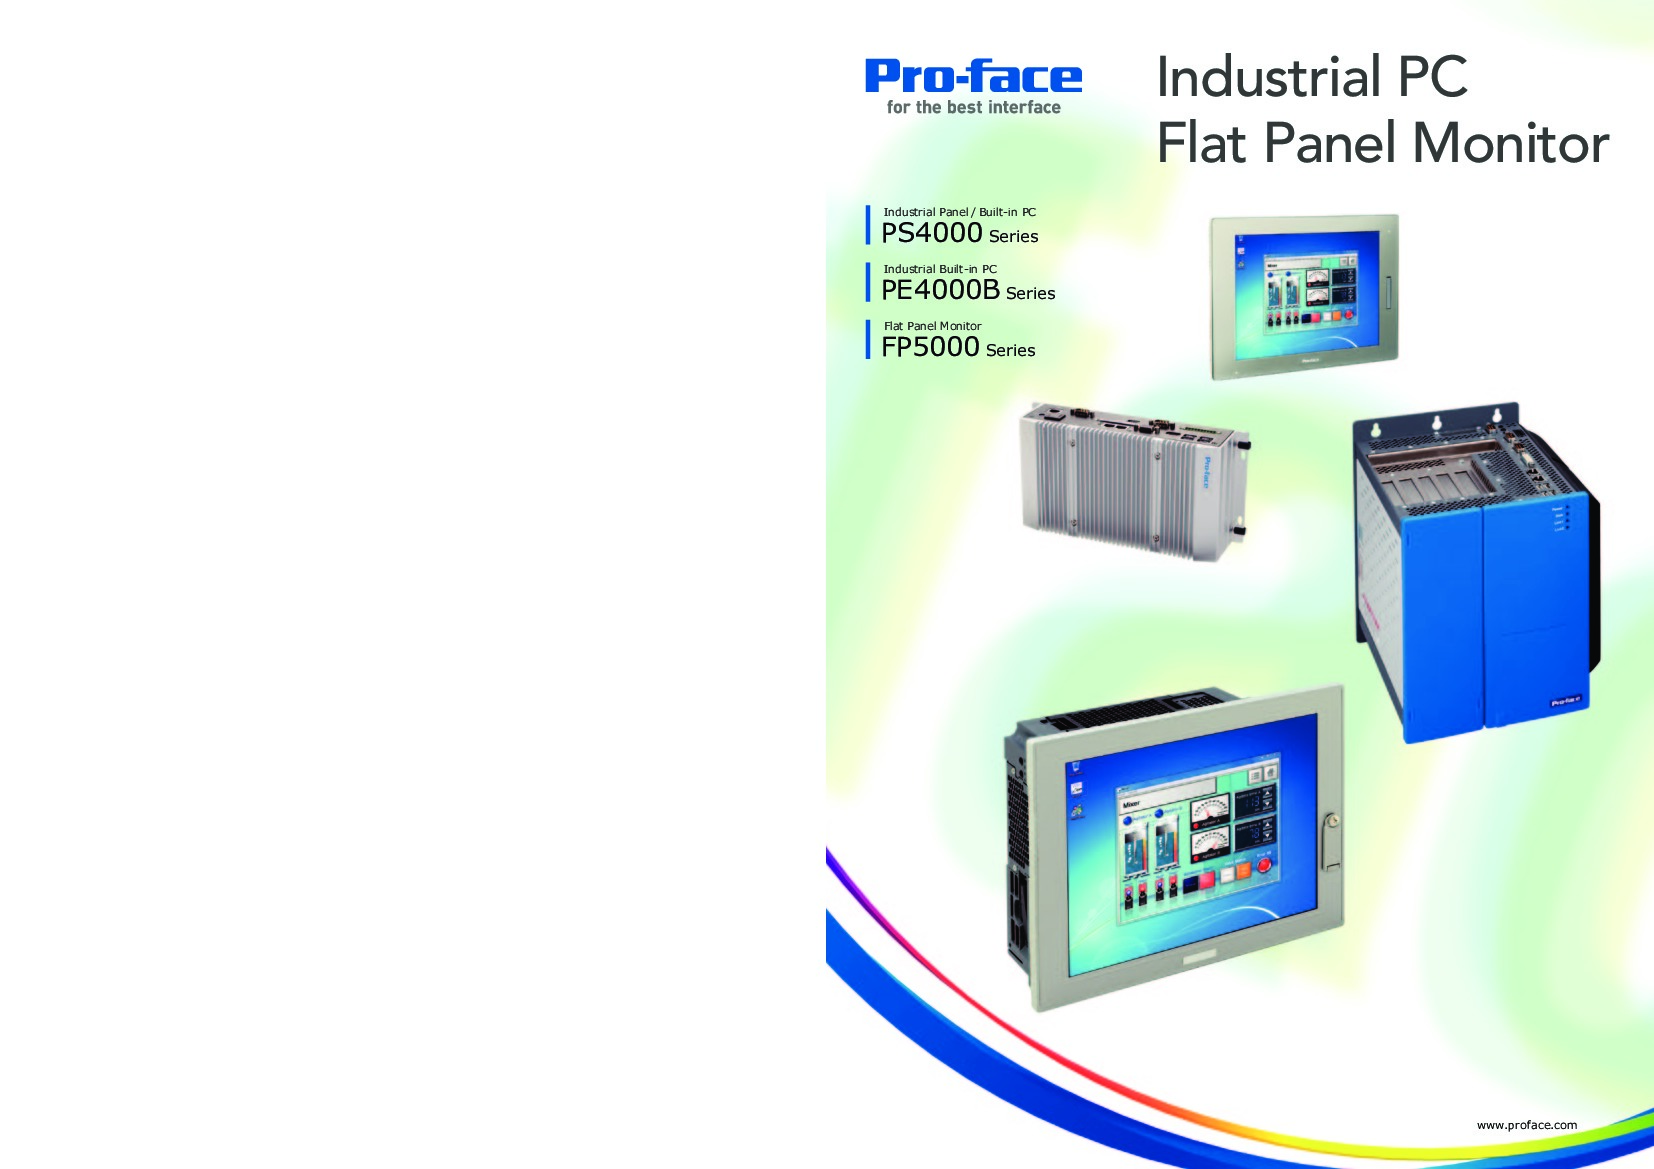 First Page Image of PFXPP170BA12K04N00 PS4000 Series Pro-Face Catalog.pdf